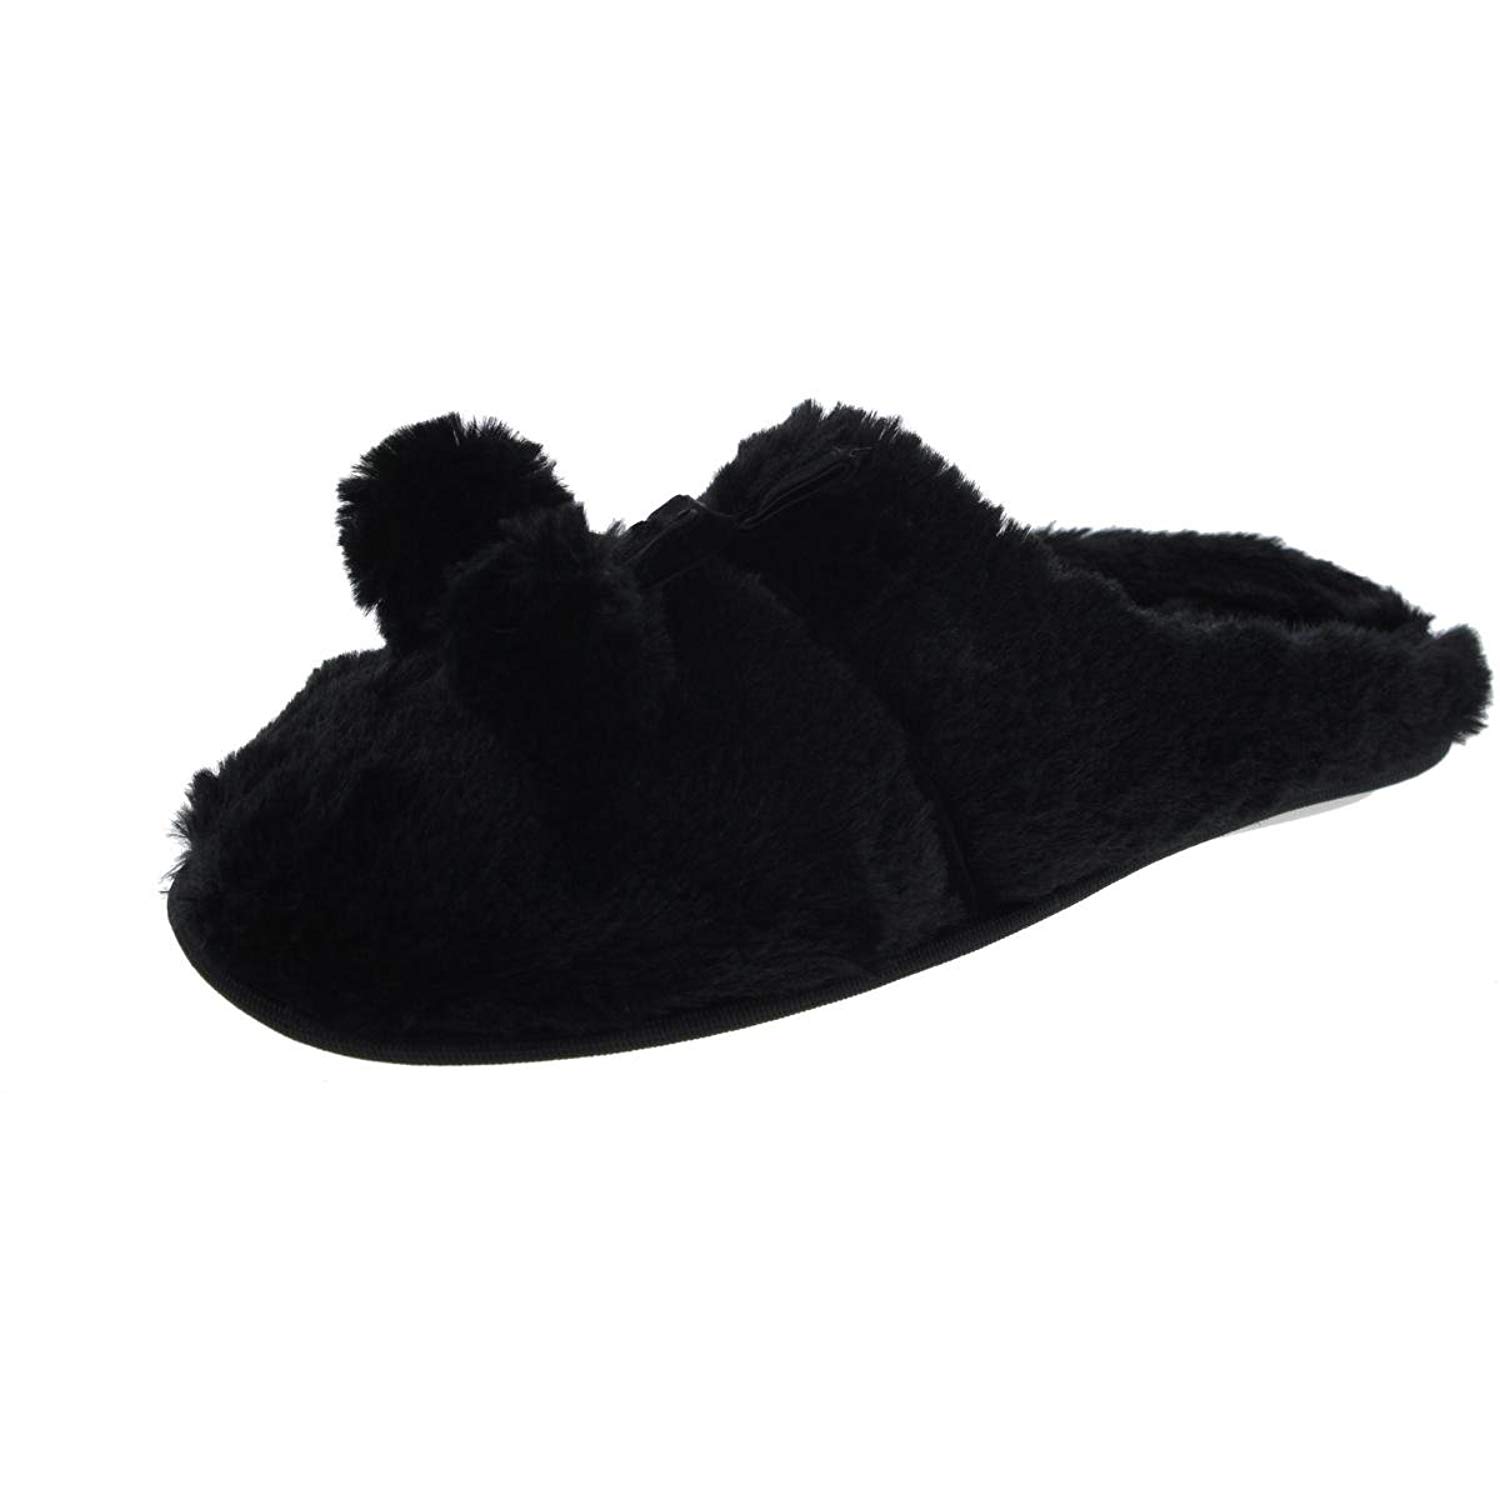 Gold Toe Womens Fluffy Indoor/Outdoor Sole Mule Slippers Black, Black ...